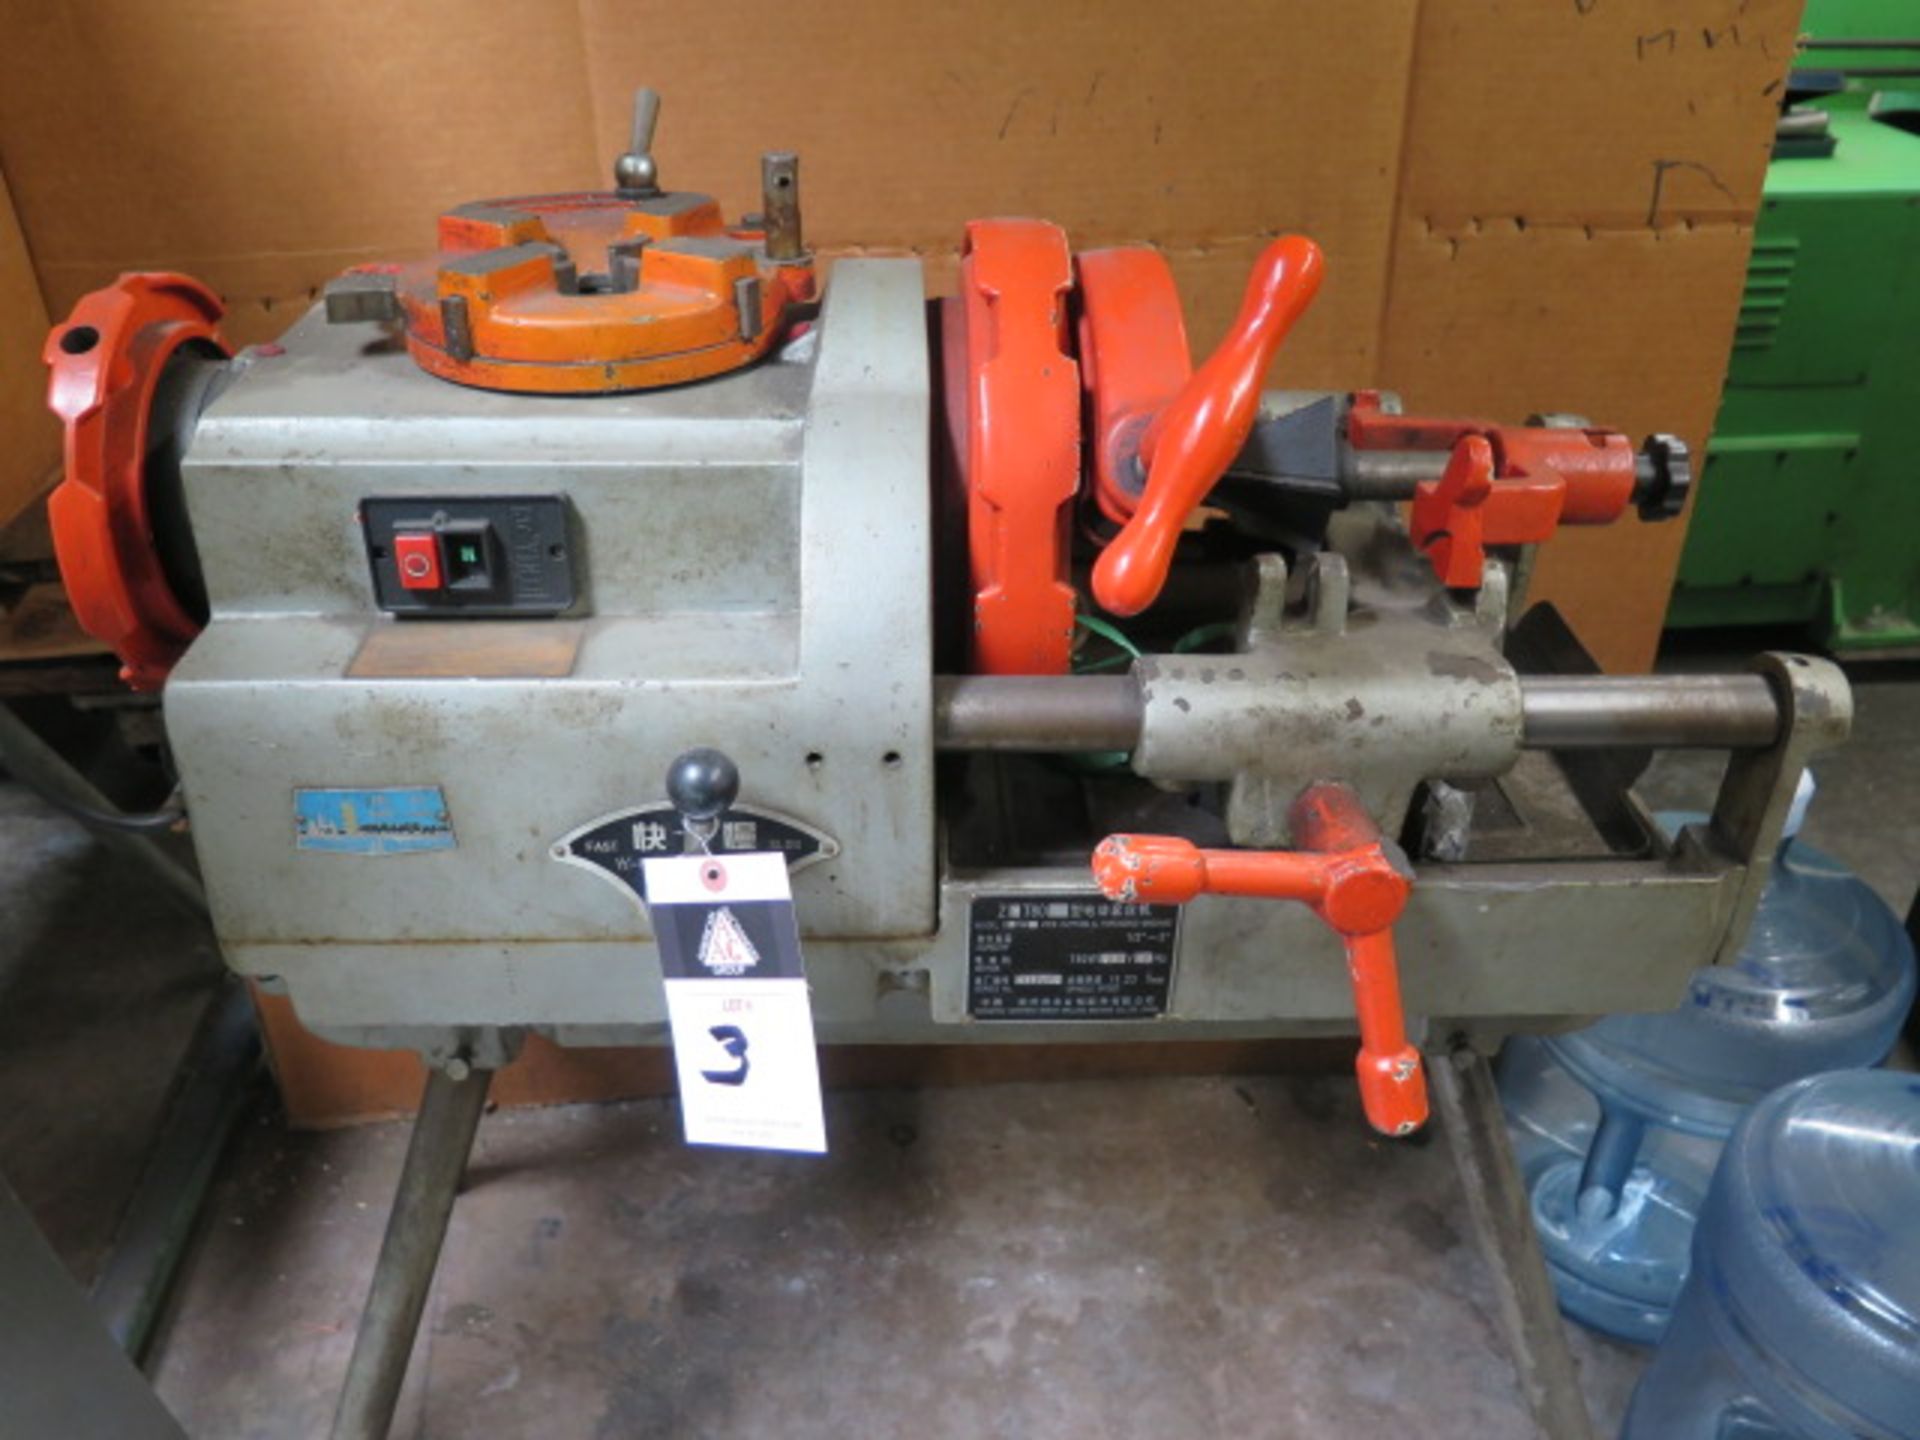 Hangzhau Z3T80 Pipe Cutting and Threading Machine s/n 5110002 (SOLD AS-IS – NO WARRANTY) - Image 2 of 9